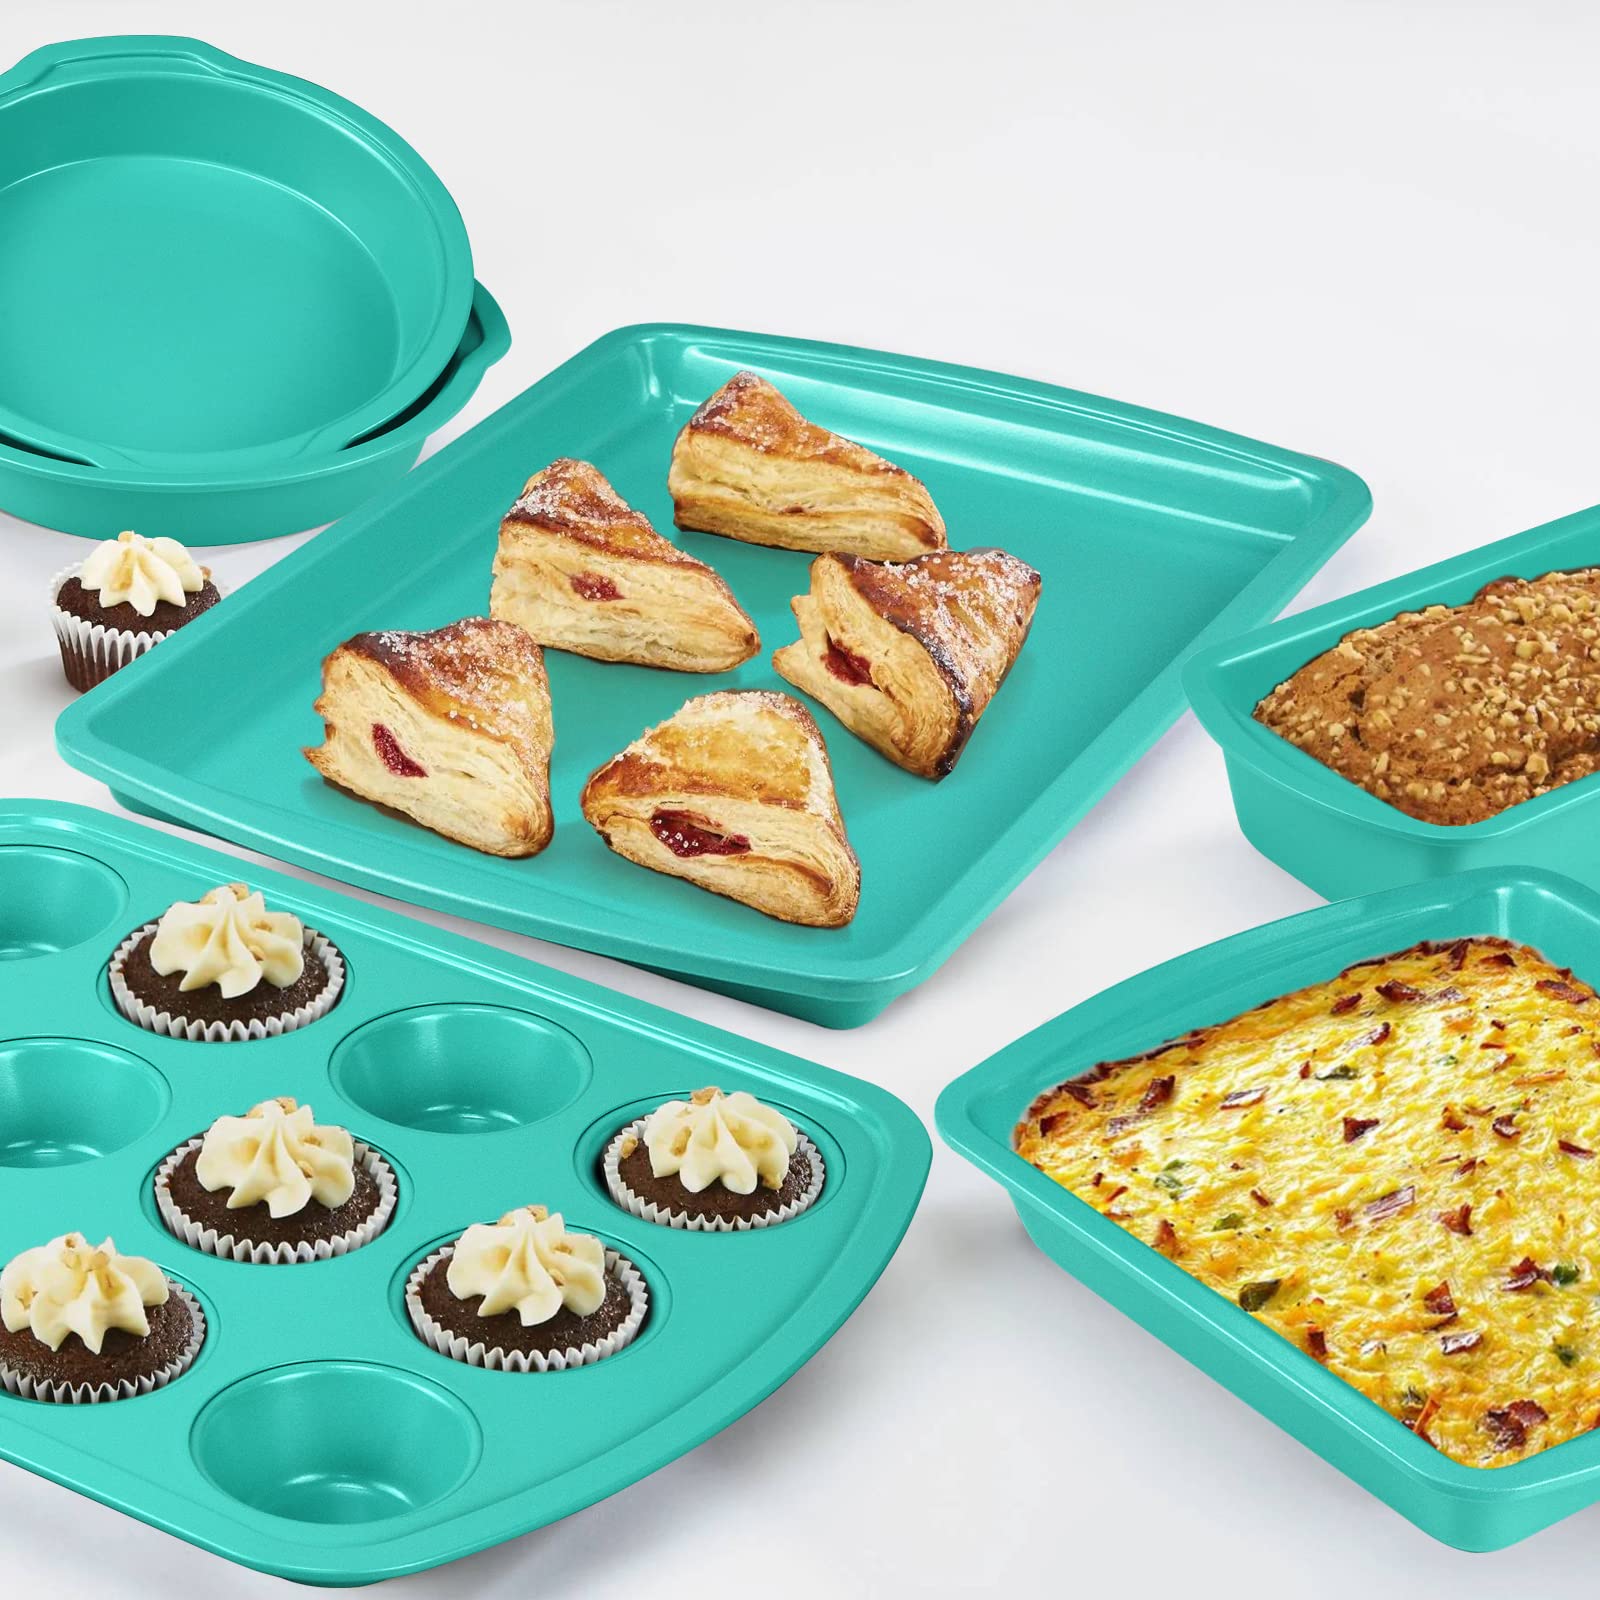 10-Piece Nonstick Bakeware Set Baking Pans, Baking Sheets, Cookie Sheets, Muffin Pan, Bread Pan, Pizza Pan, Cake Pan and Cooling Rack, Oven Safe/0.8mm Thick/ Dishwasher Safe/ Heavy Duty